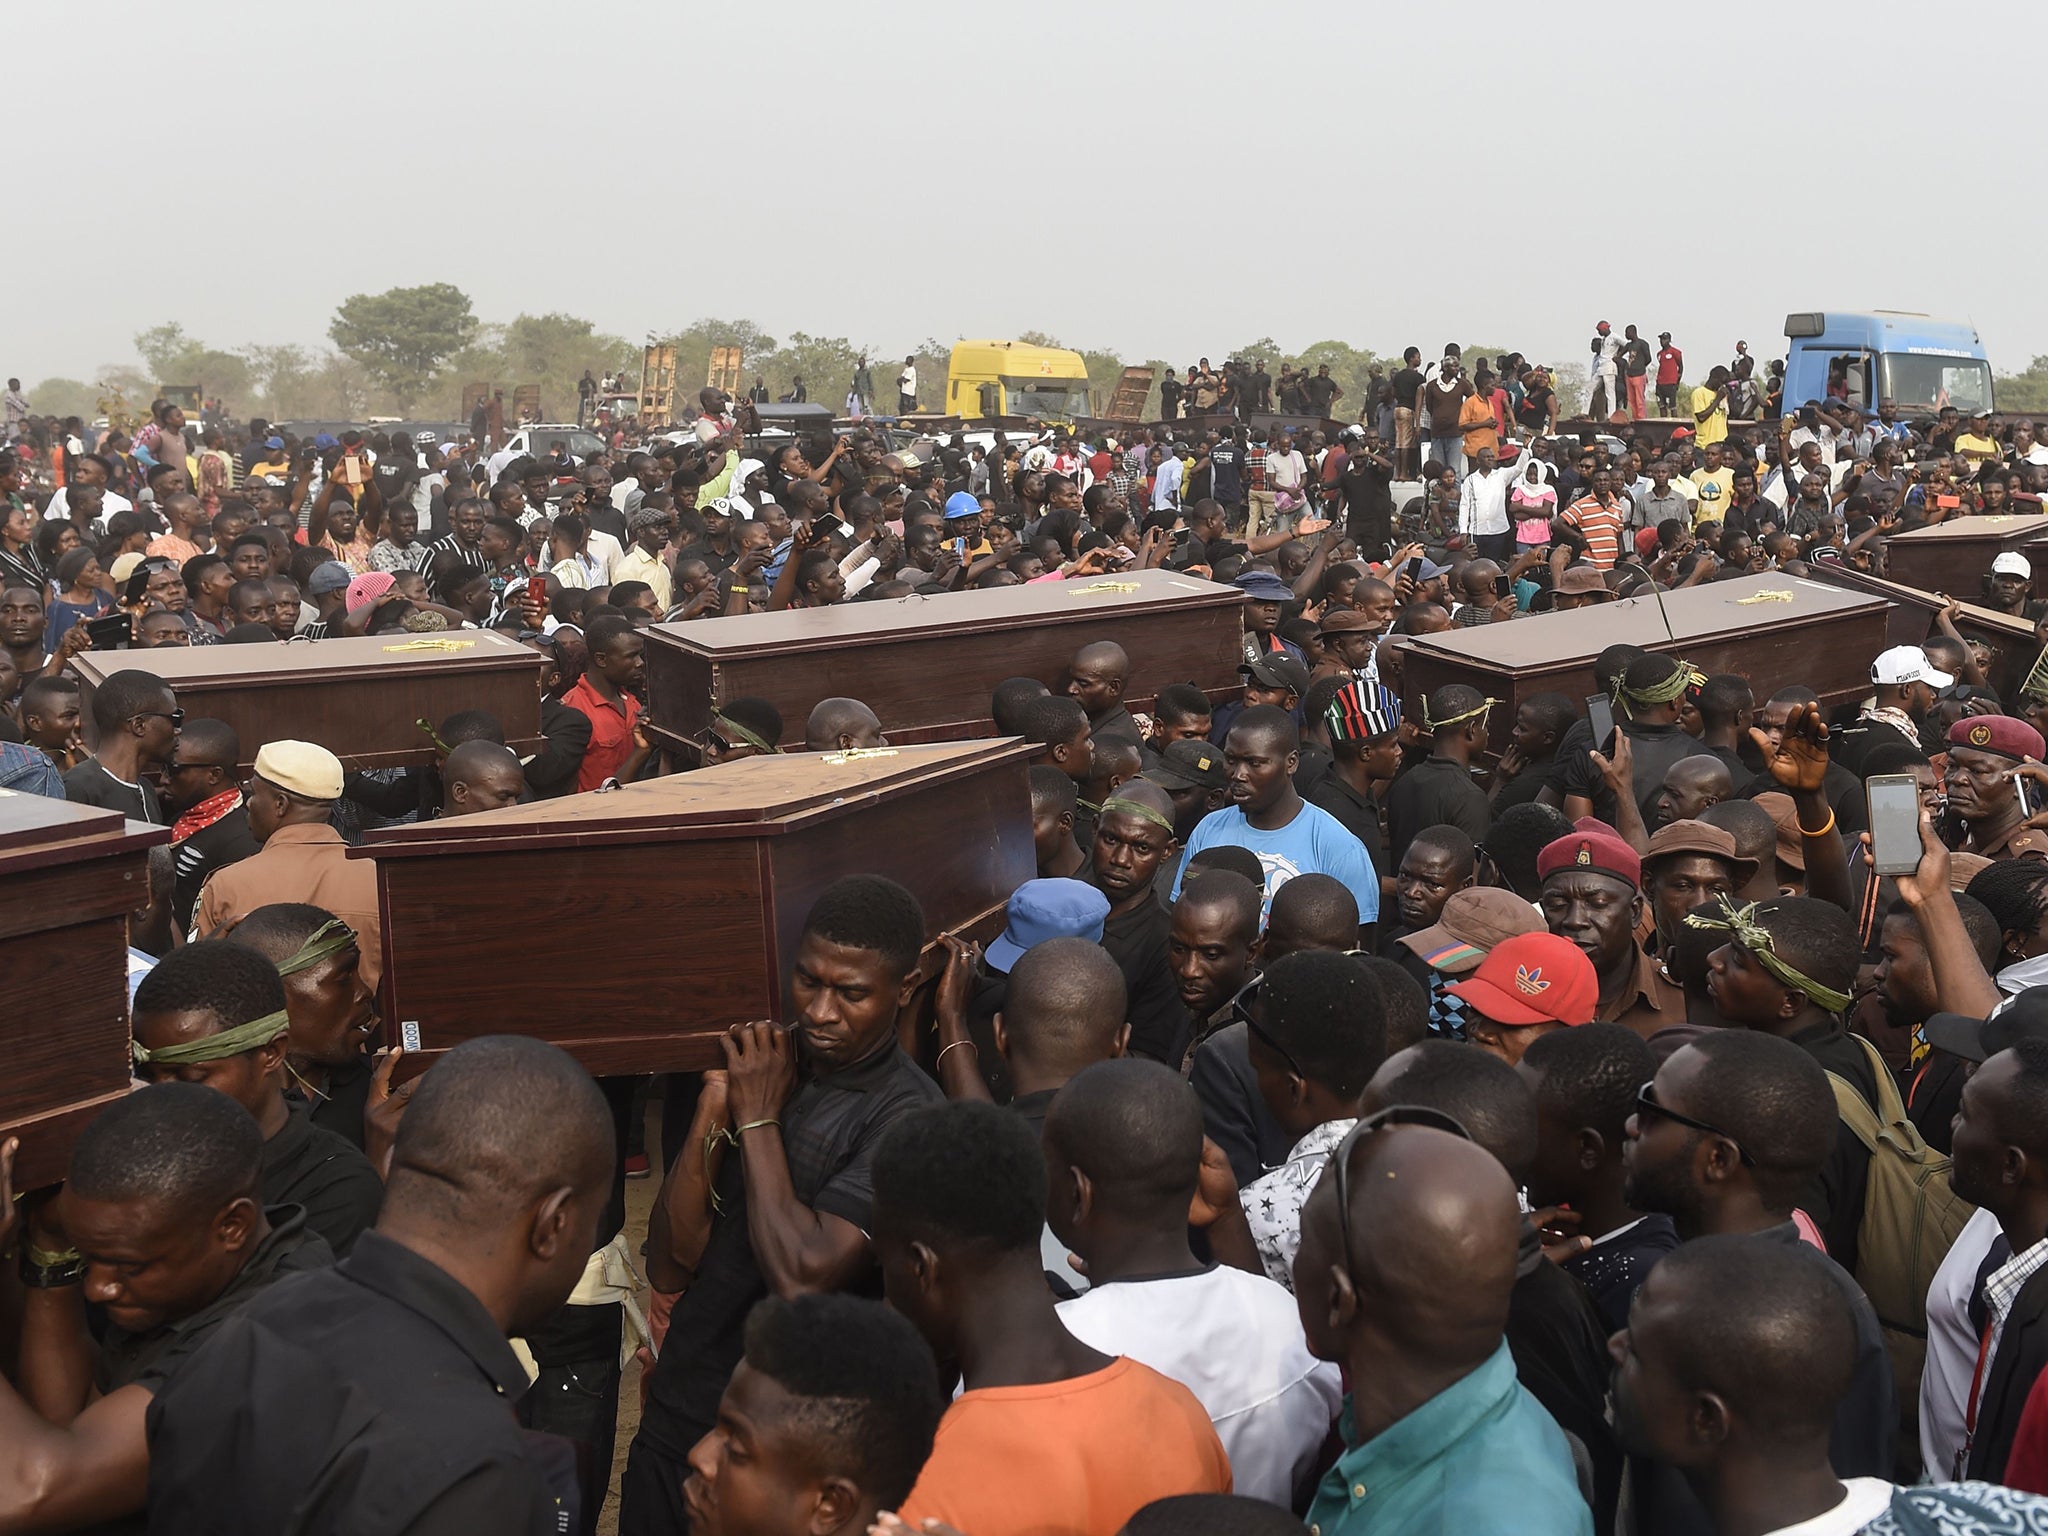 Pall bearers carry coffins during the funeral service for people killed during clashes between cattle herders and farmers, on 11 January, 2018, in Ibrahim Babangida Square in the Benue state capital Makurdi